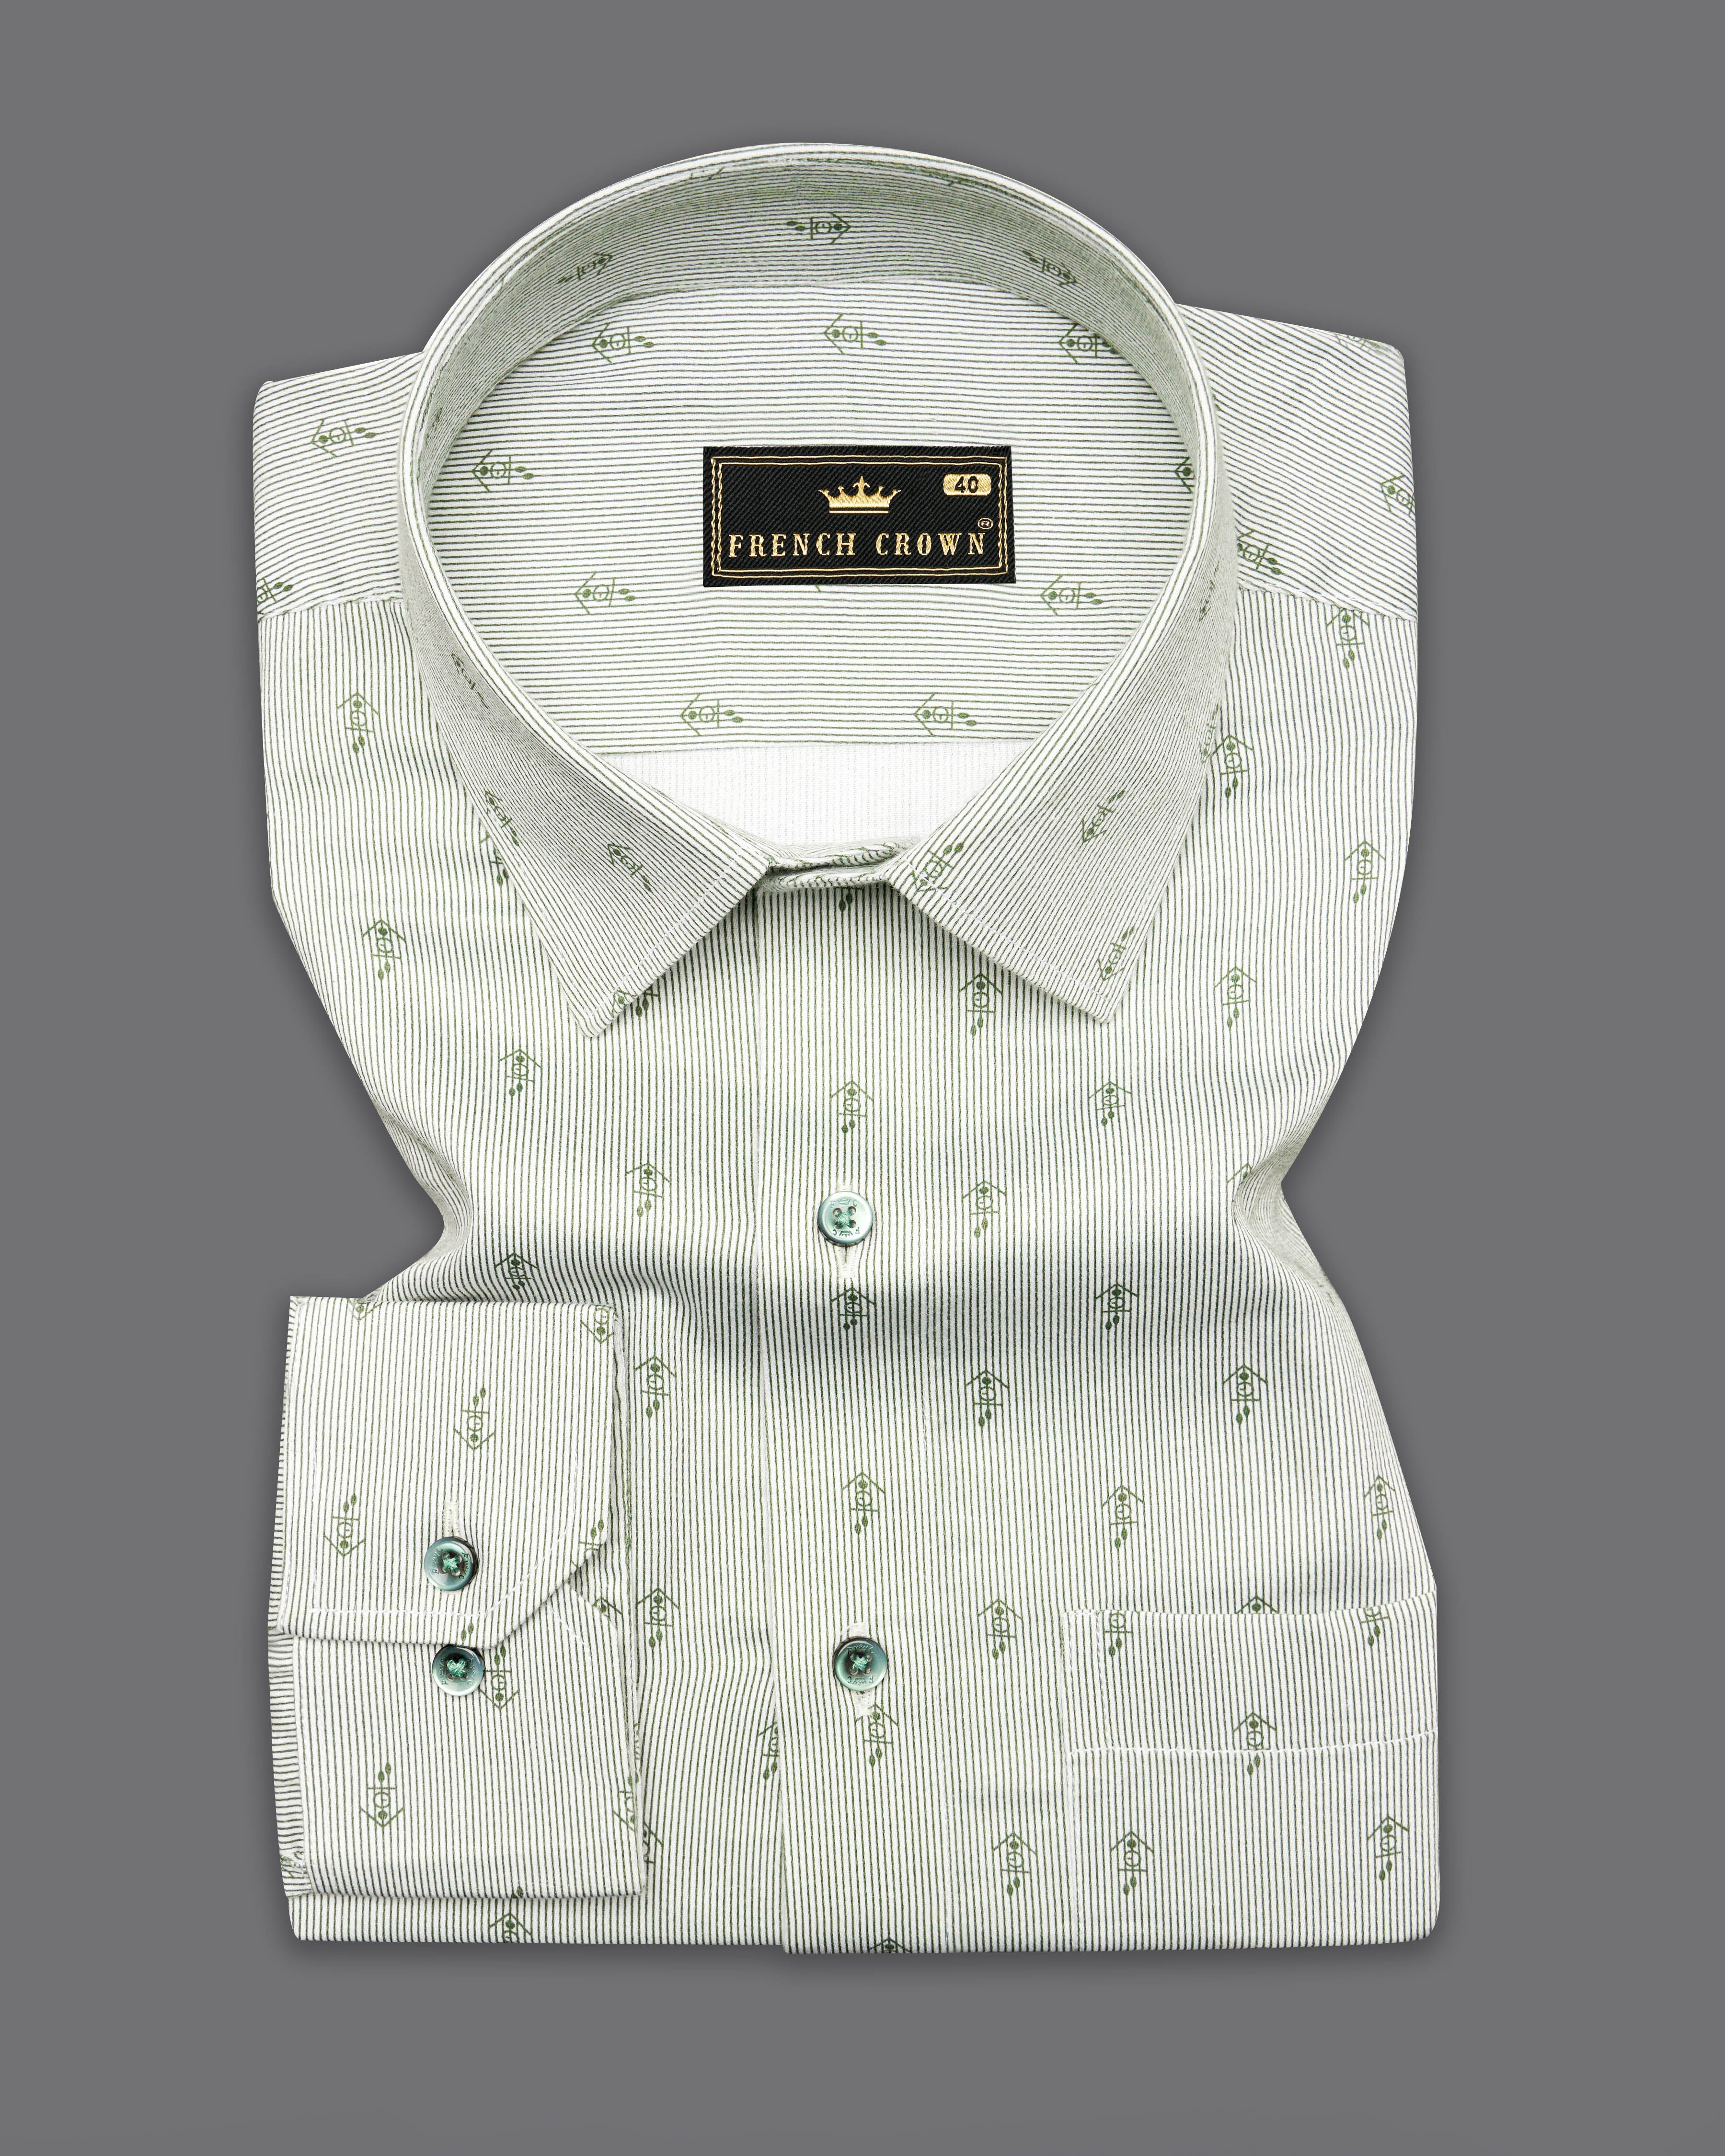 Catskill White with Hemlock Green Pinstriped with Animated Printed Premium Cotton Designer Shirt 7672-GR-RPRT-002-38, 7672-GR-RPRT-002-H-38, 7672-GR-RPRT-002-39, 7672-GR-RPRT-002-H-39, 7672-GR-RPRT-002-40, 7672-GR-RPRT-002-H-40, 7672-GR-RPRT-002-42, 7672-GR-RPRT-002-H-42, 7672-GR-RPRT-002-44, 7672-GR-RPRT-002-H-44, 7672-GR-RPRT-002-46, 7672-GR-RPRT-002-H-46, 7672-GR-RPRT-002-48, 7672-GR-RPRT-002-H-48, 7672-GR-RPRT-002-50, 7672-GR-RPRT-002-H-50, 7672-GR-RPRT-002-52, 7672-GR-RPRT-002-H-52